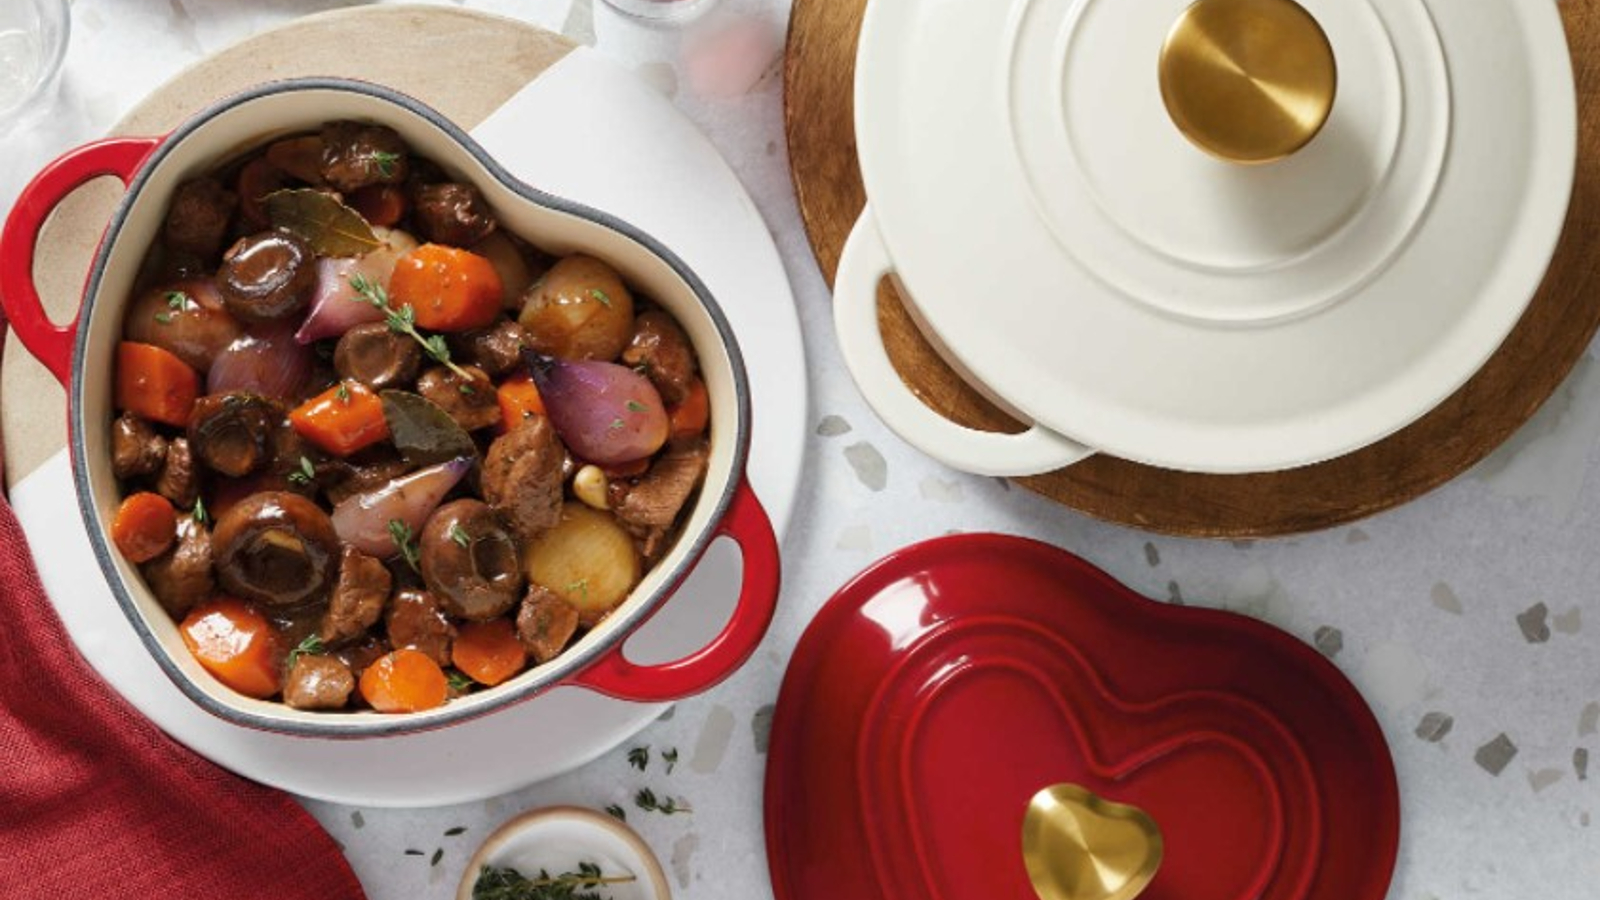 Aldi is selling cute heart-shaped cast iron cookware for under £20